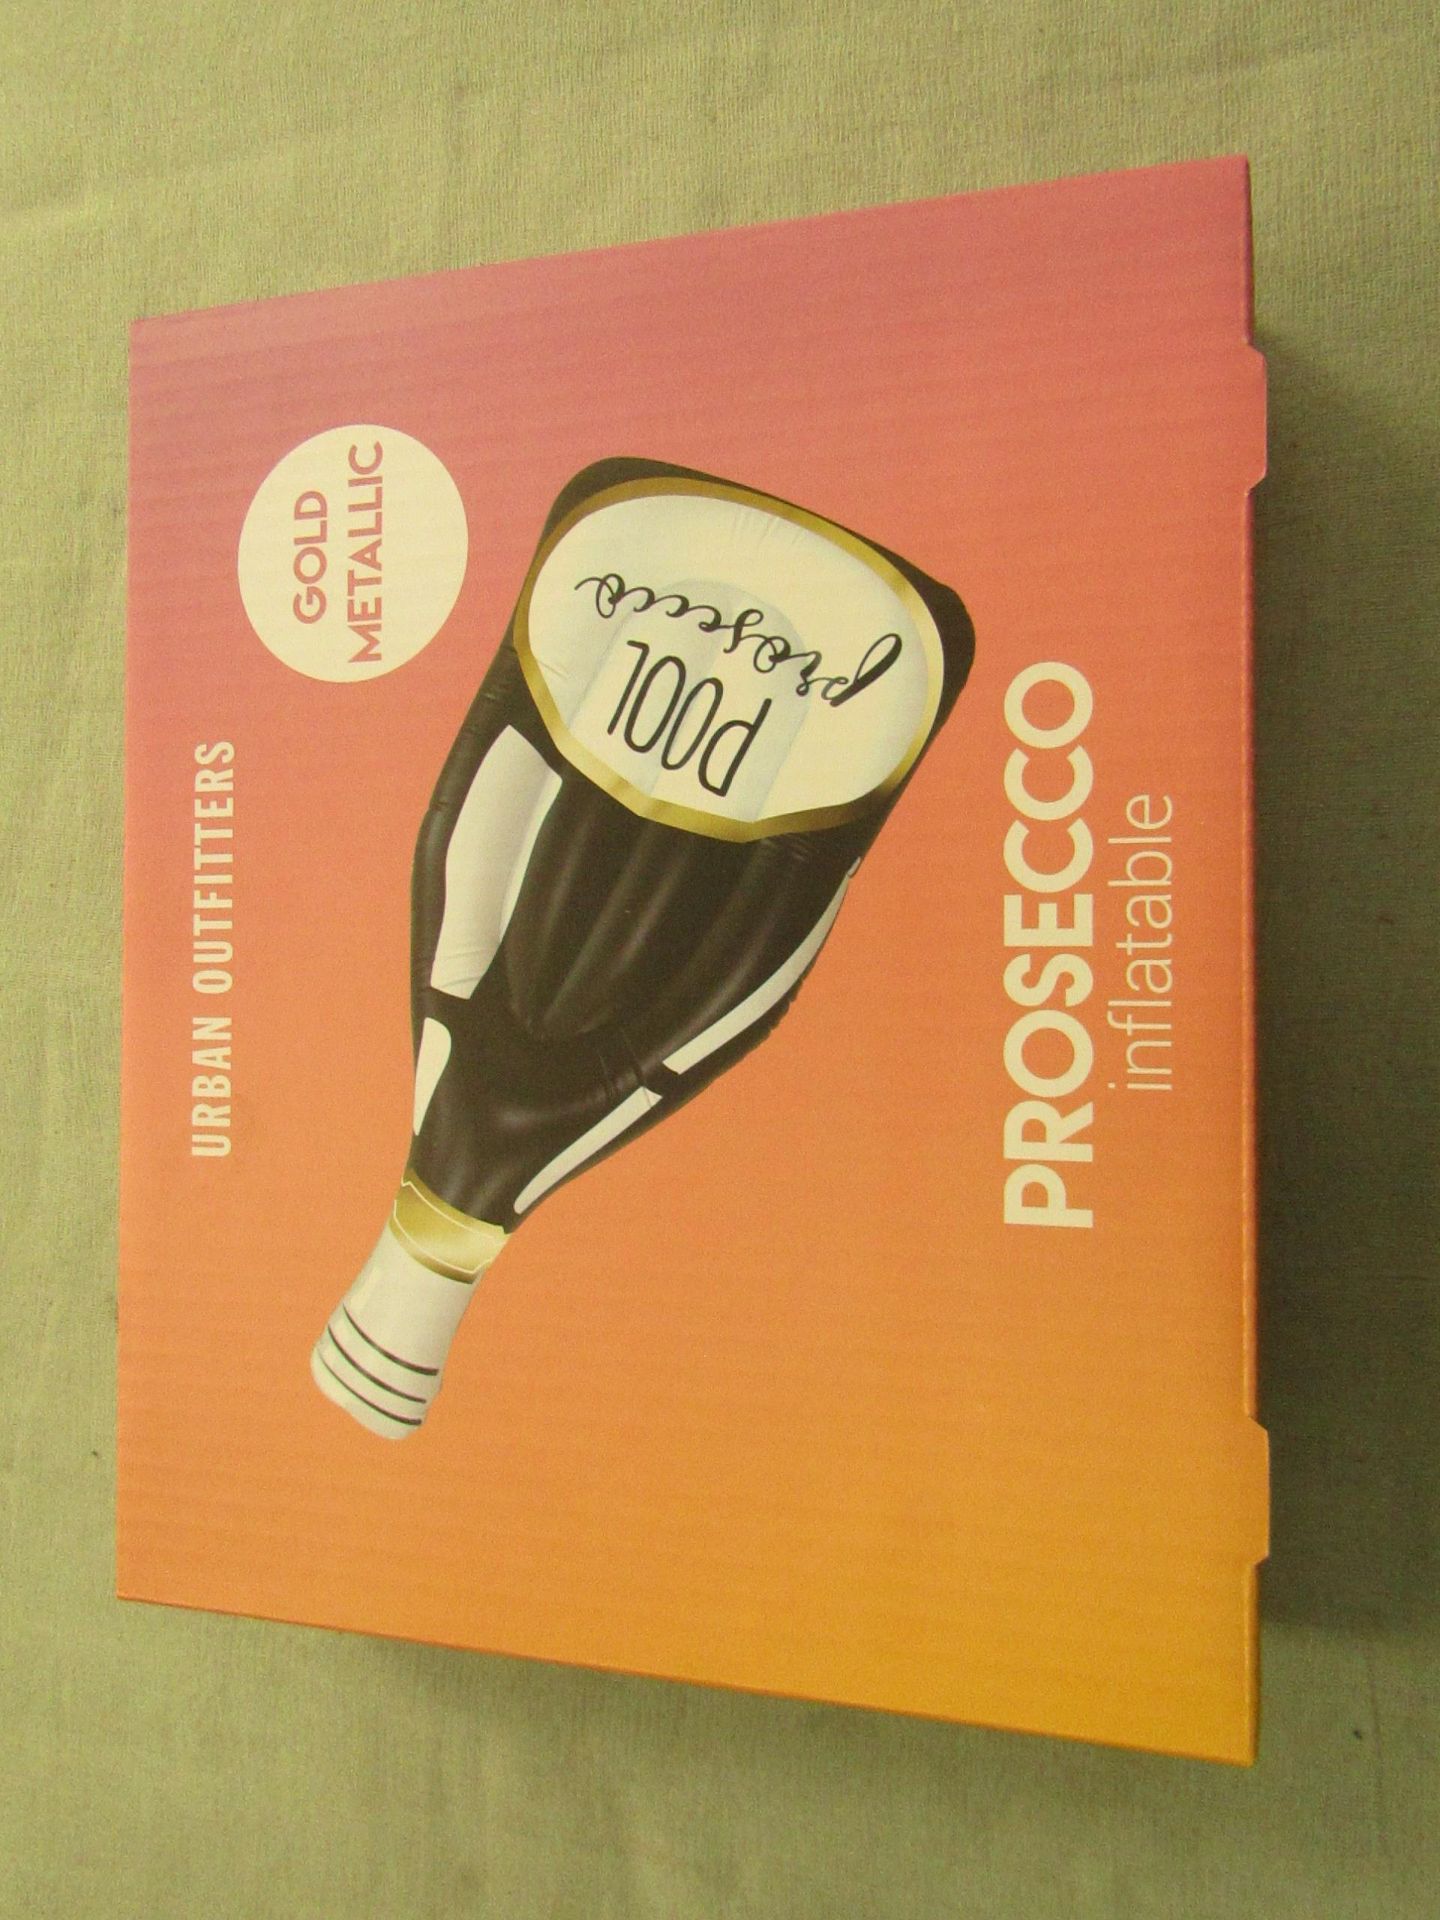 Urban Outfitters - Metallic Gold Inflatable Prosecco Bottle - New & Boxed.